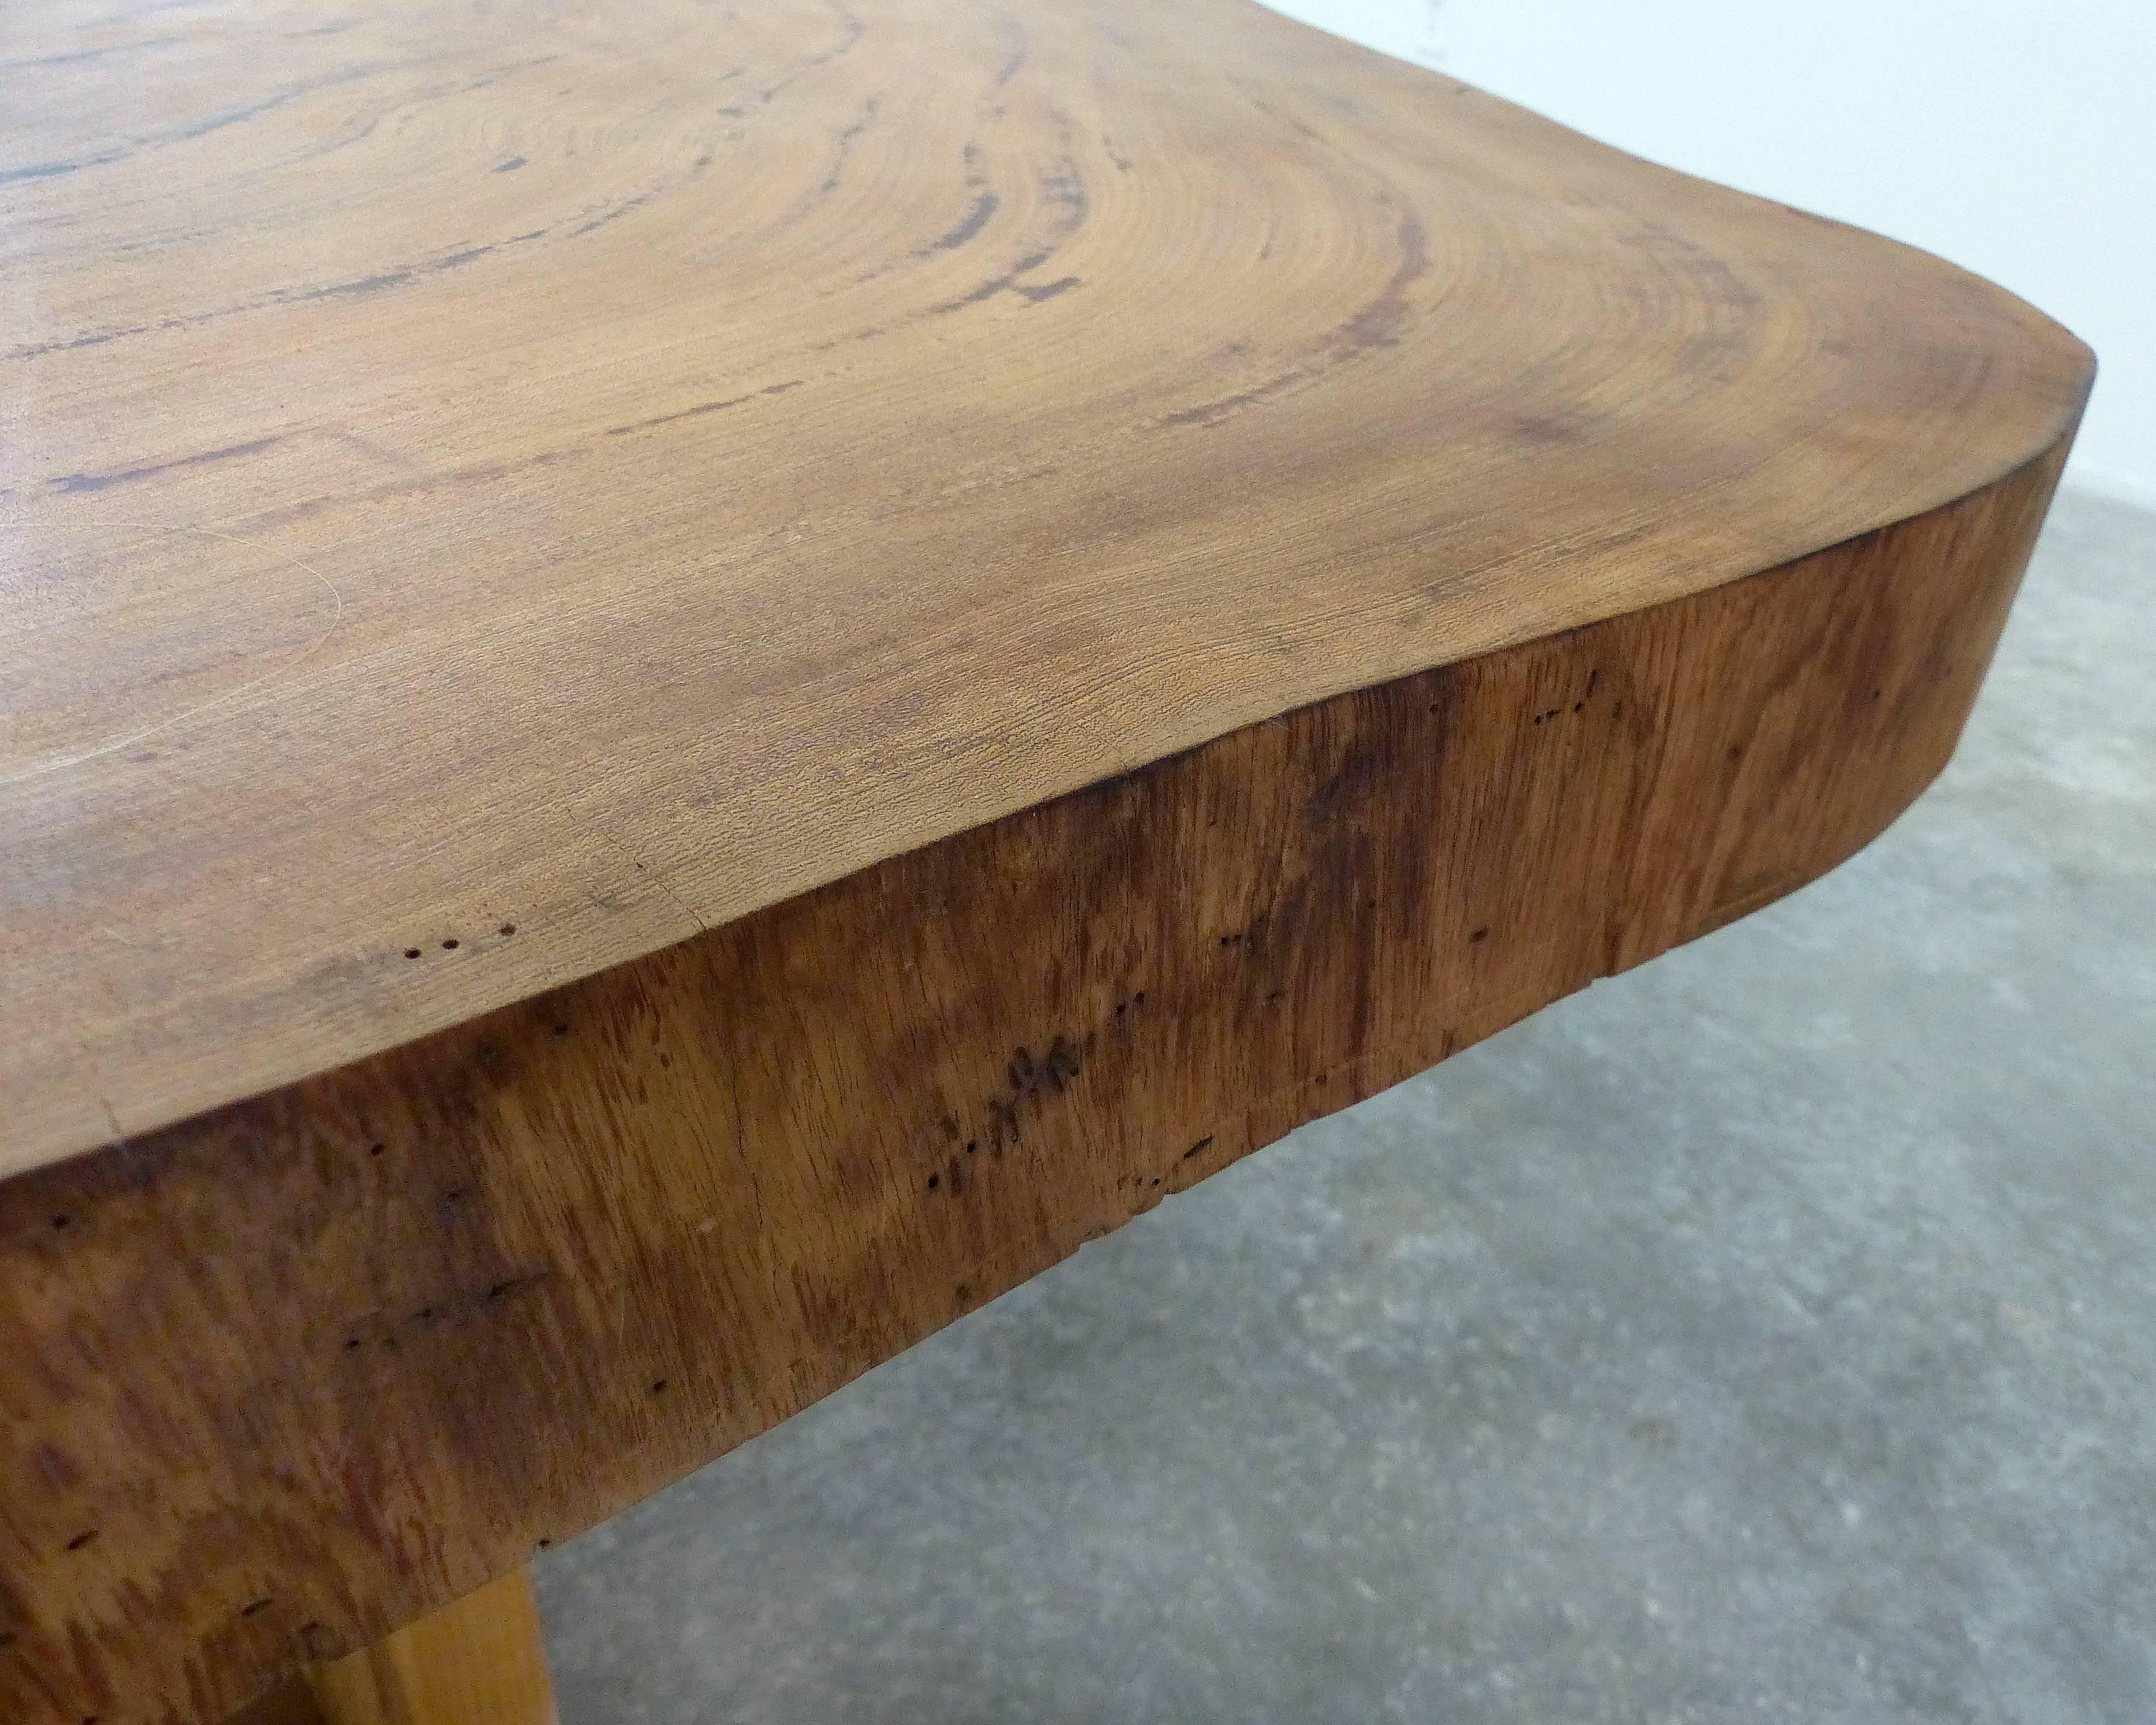 Contemporary Organic Dining Table by Valeria Totti, Reclaimed Wood from the Brazilian Amazon